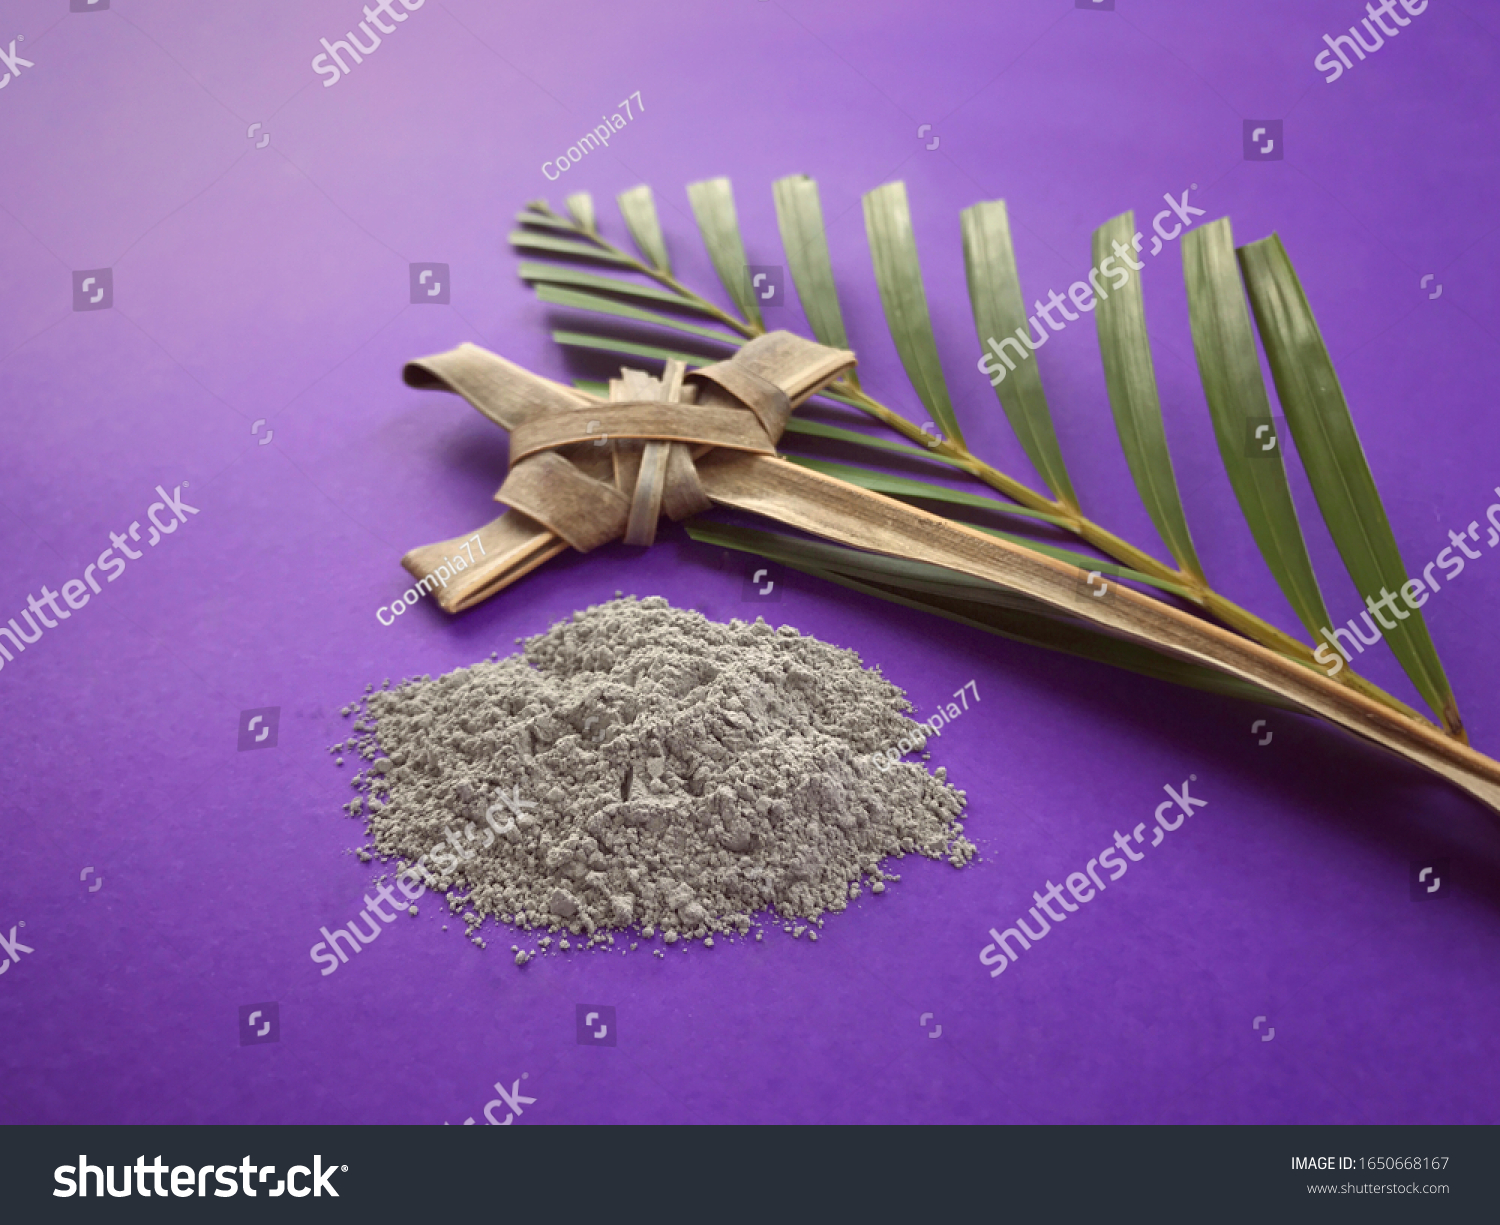 Good Friday, Palm Sunday, Ash Wednesday, Lent Season and Holy Week concept.  Christian crosses made of palm leaves and ashes on purple background. #1650668167